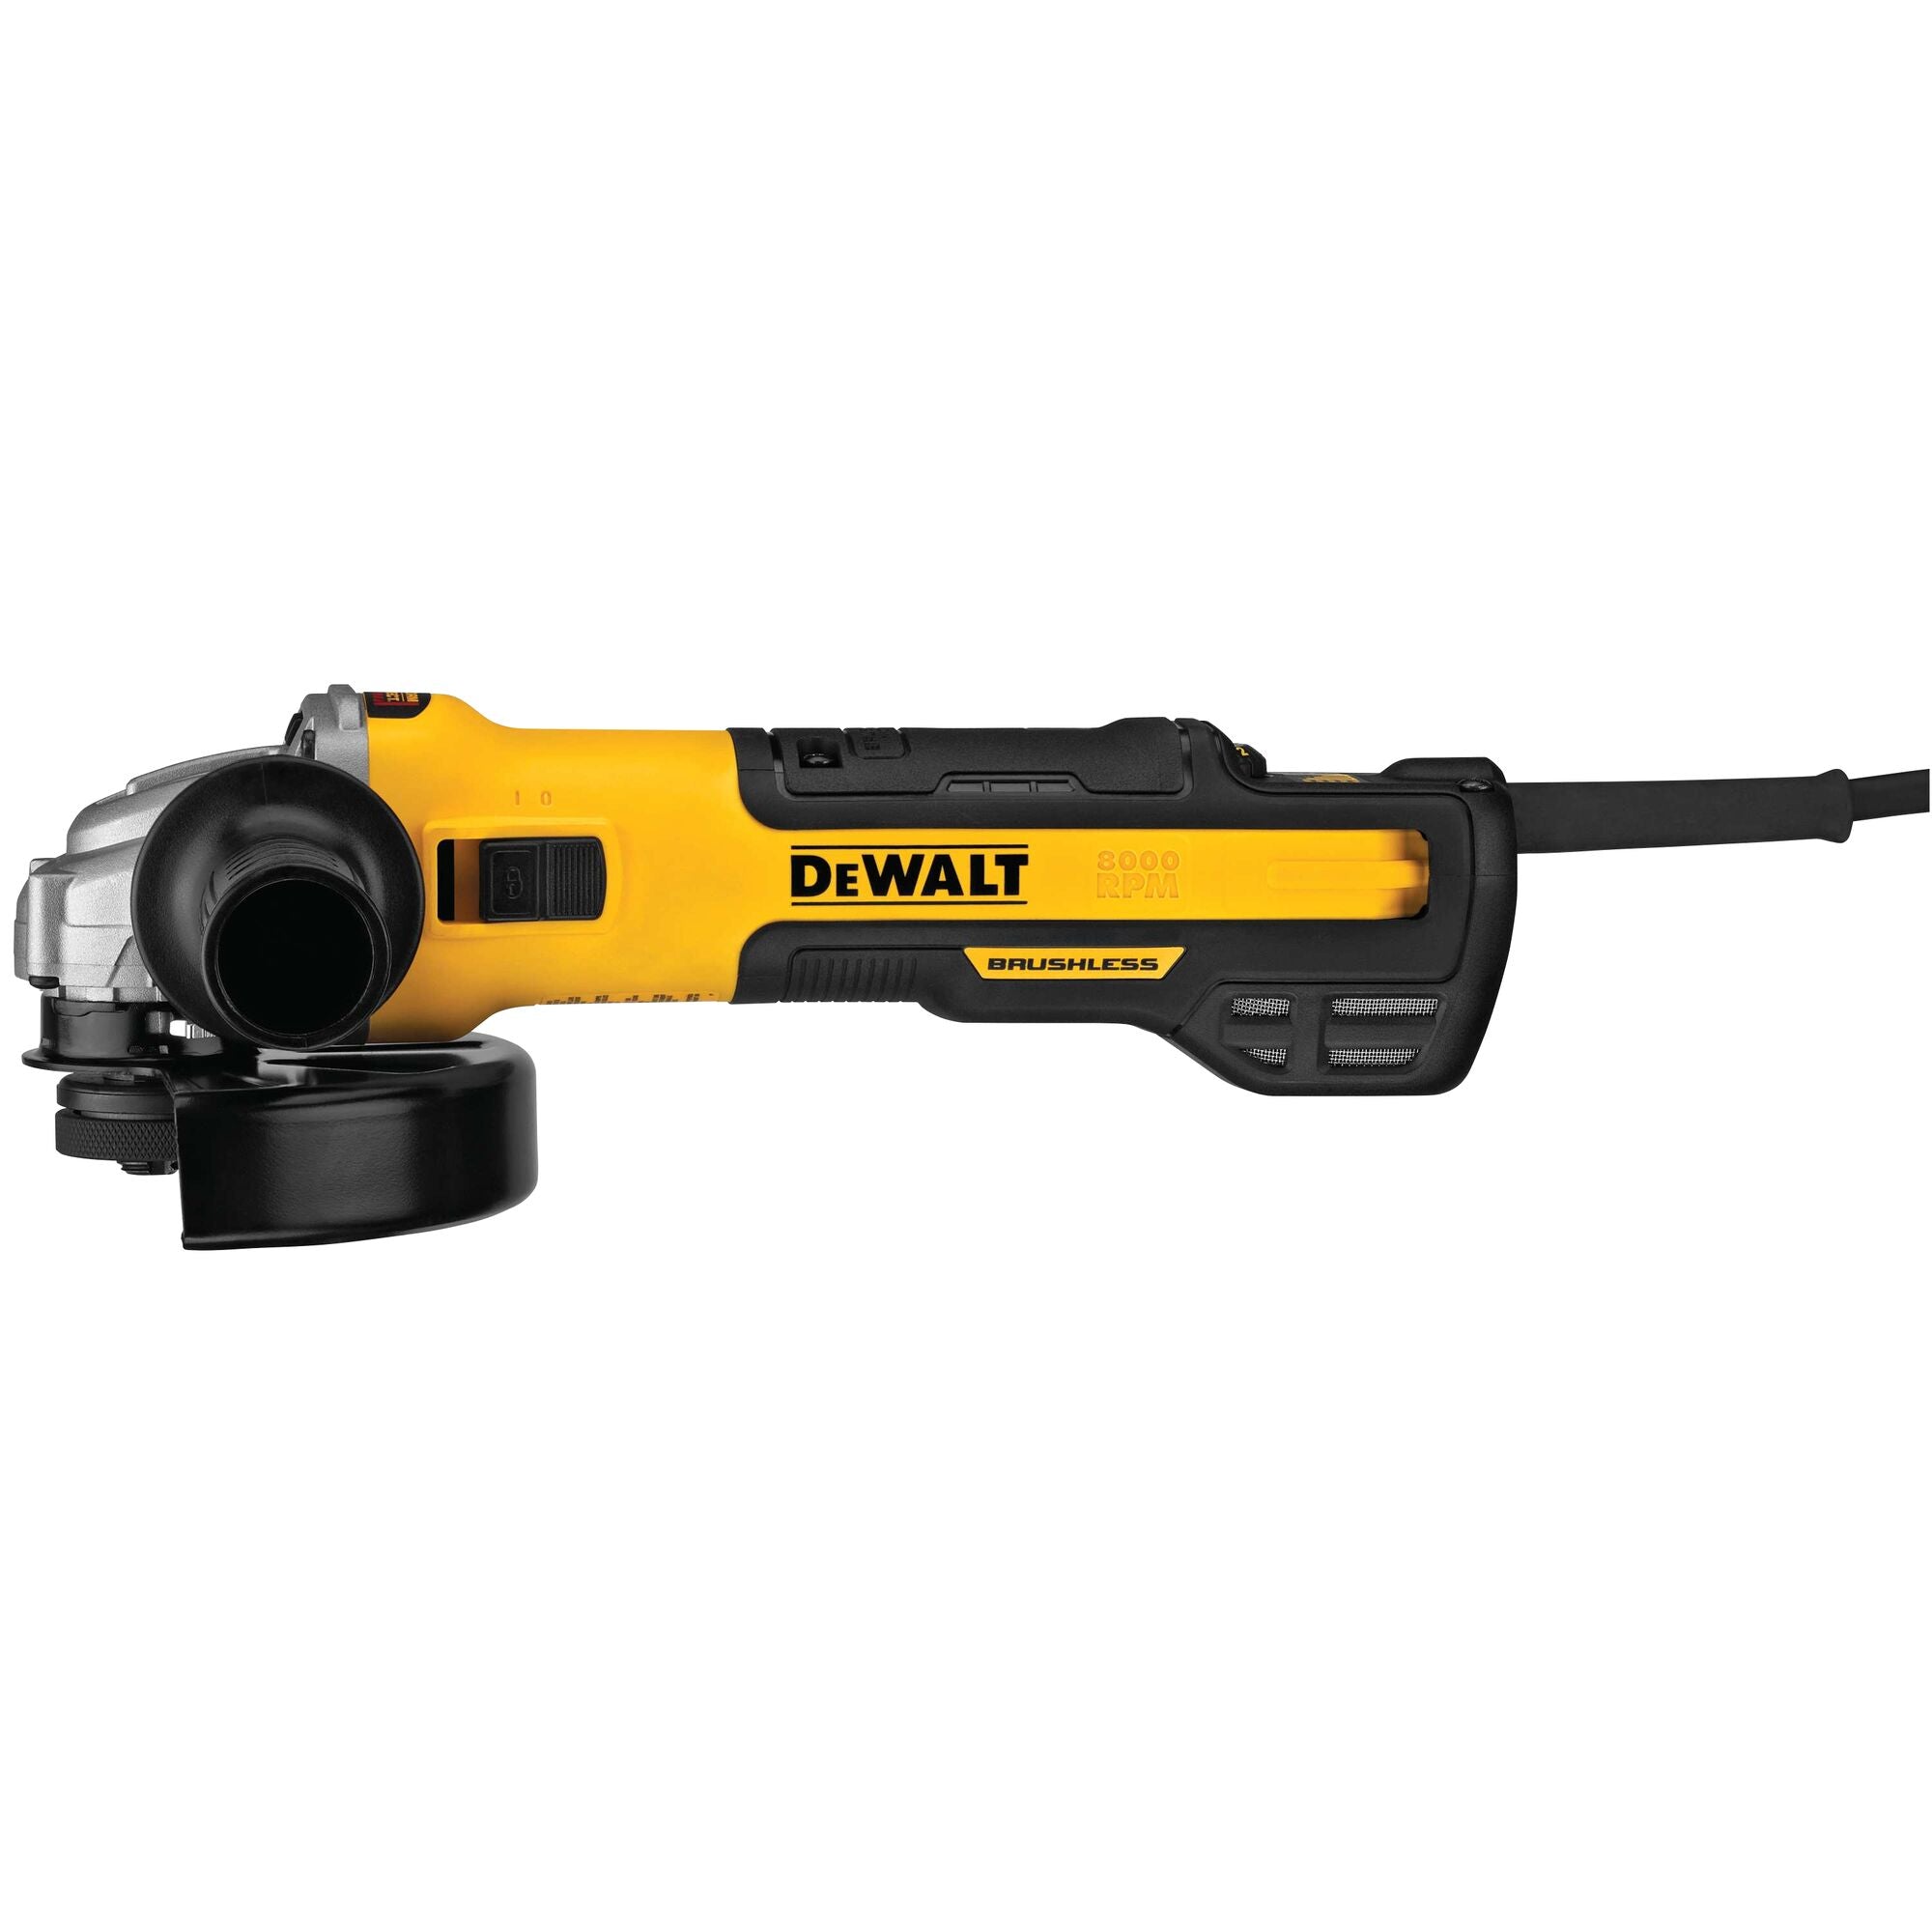 Dewalt - DWE43240INOX 5 in. / 6 in. Brushless Small Angle Grinder with Variable Speed Slide Switch, INOX